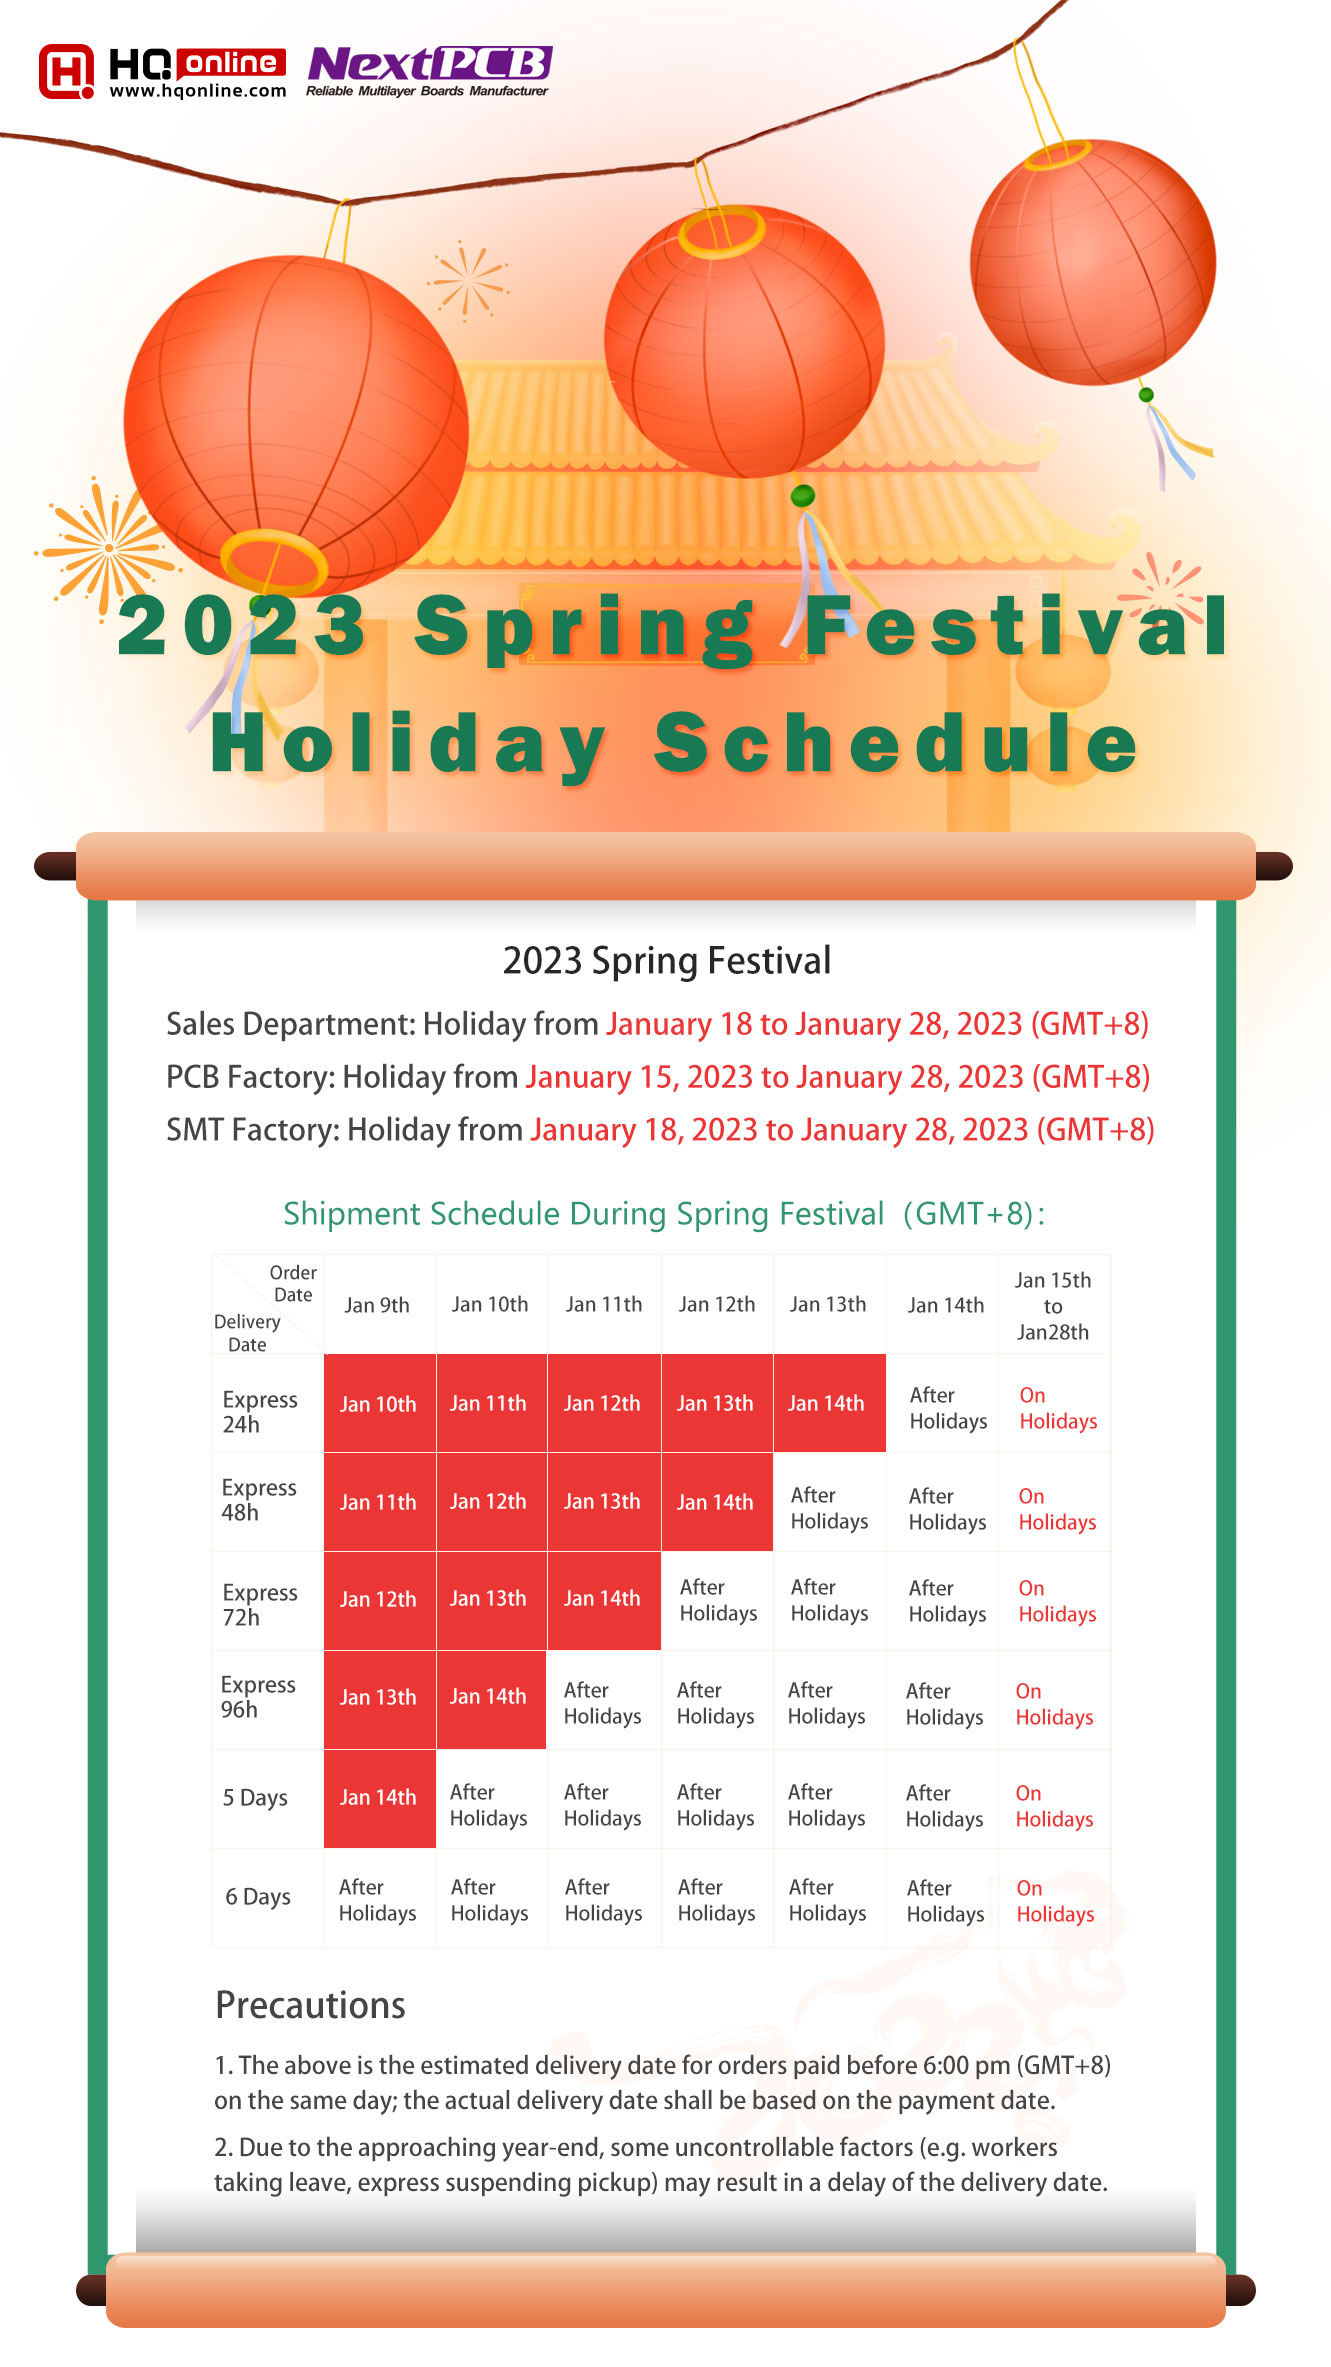 Holiday Schedule for Chinese Spring Festival 2023